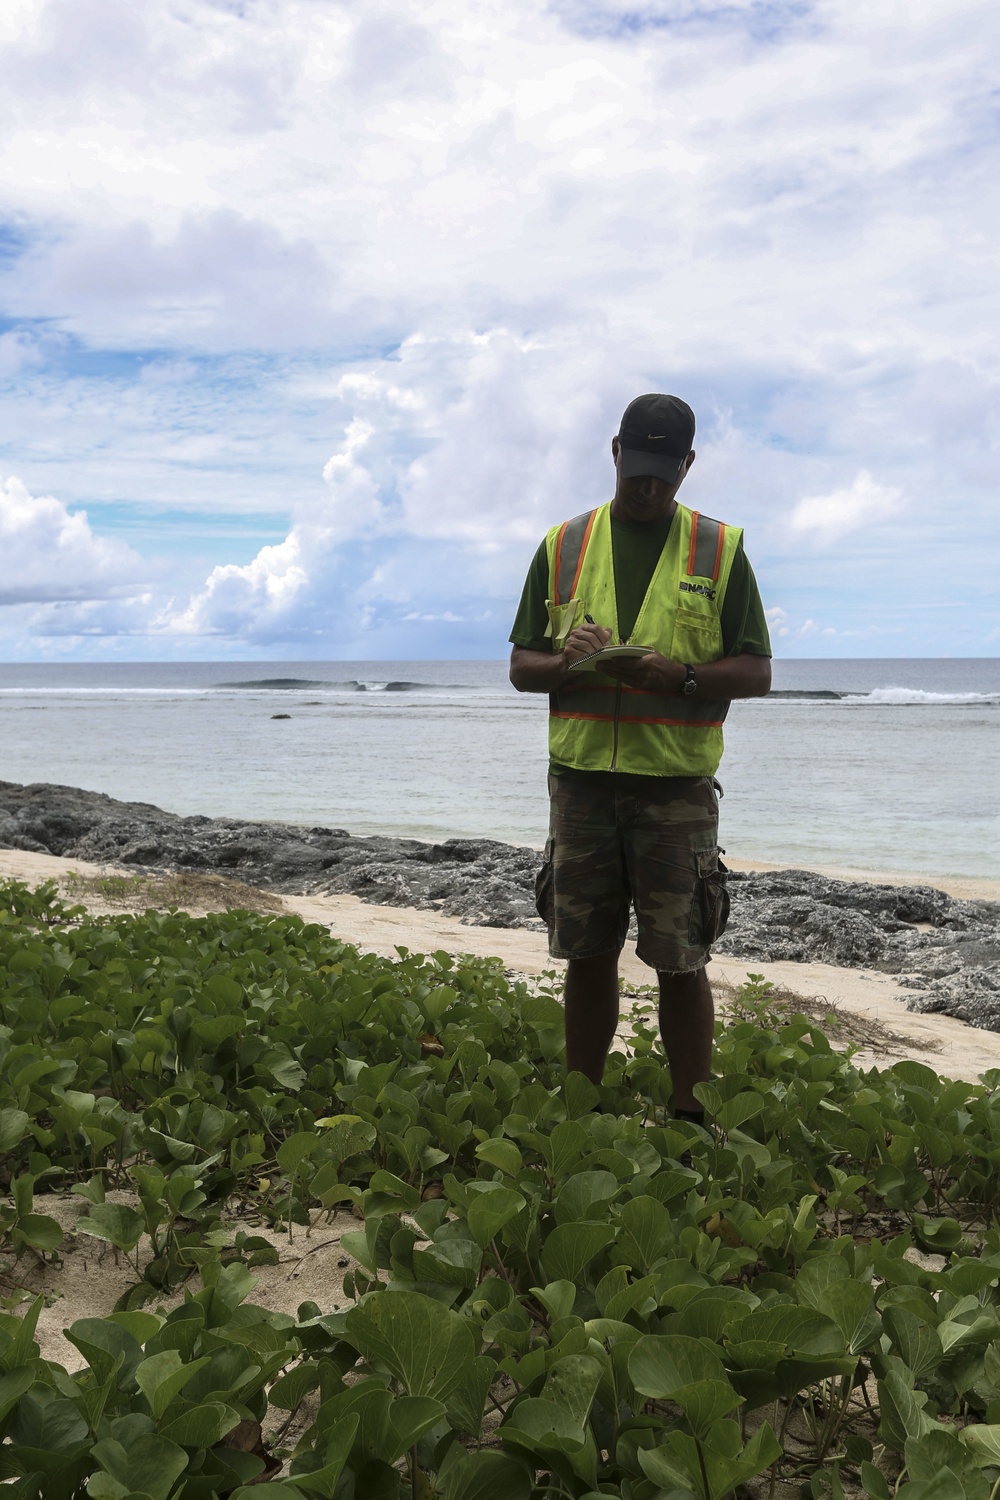 Valiant Shield 16: U.S. military cancels beach landing to protect endangered turtles on Tinian